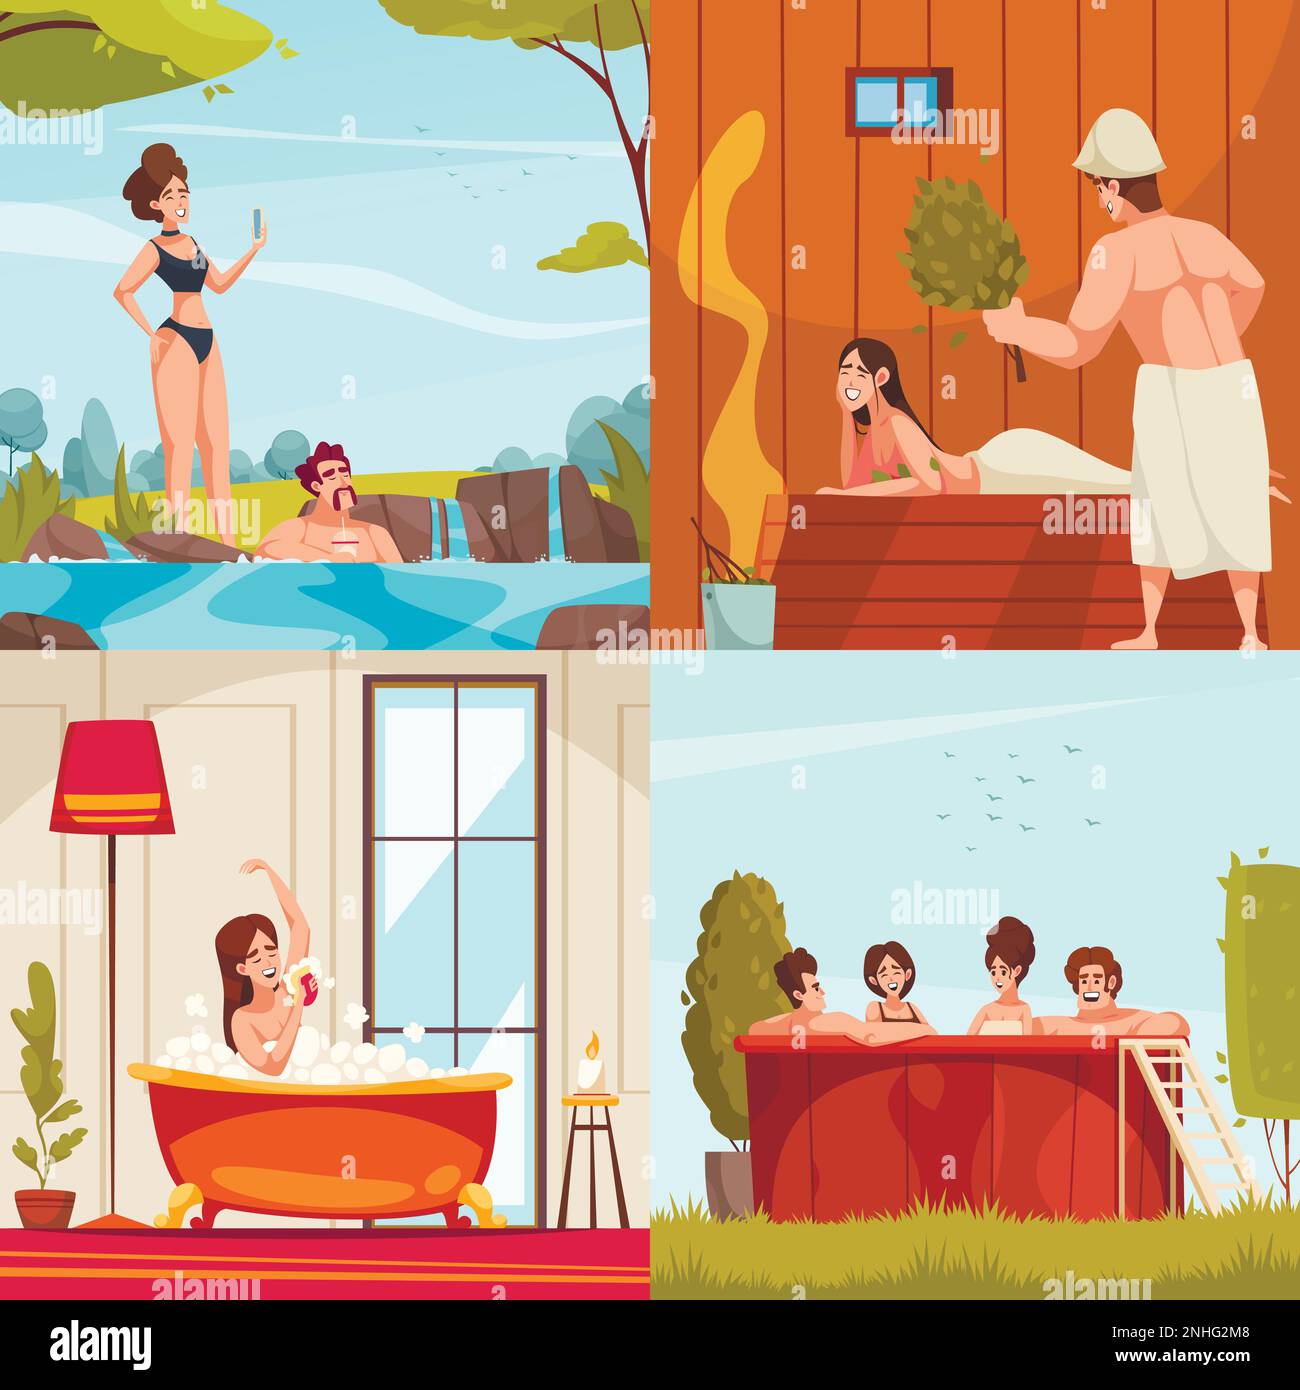 Bathing 2x2 design concept with people relaxing in thermal waters sauna and home bathroom cartoon vector illustration Stock Vector